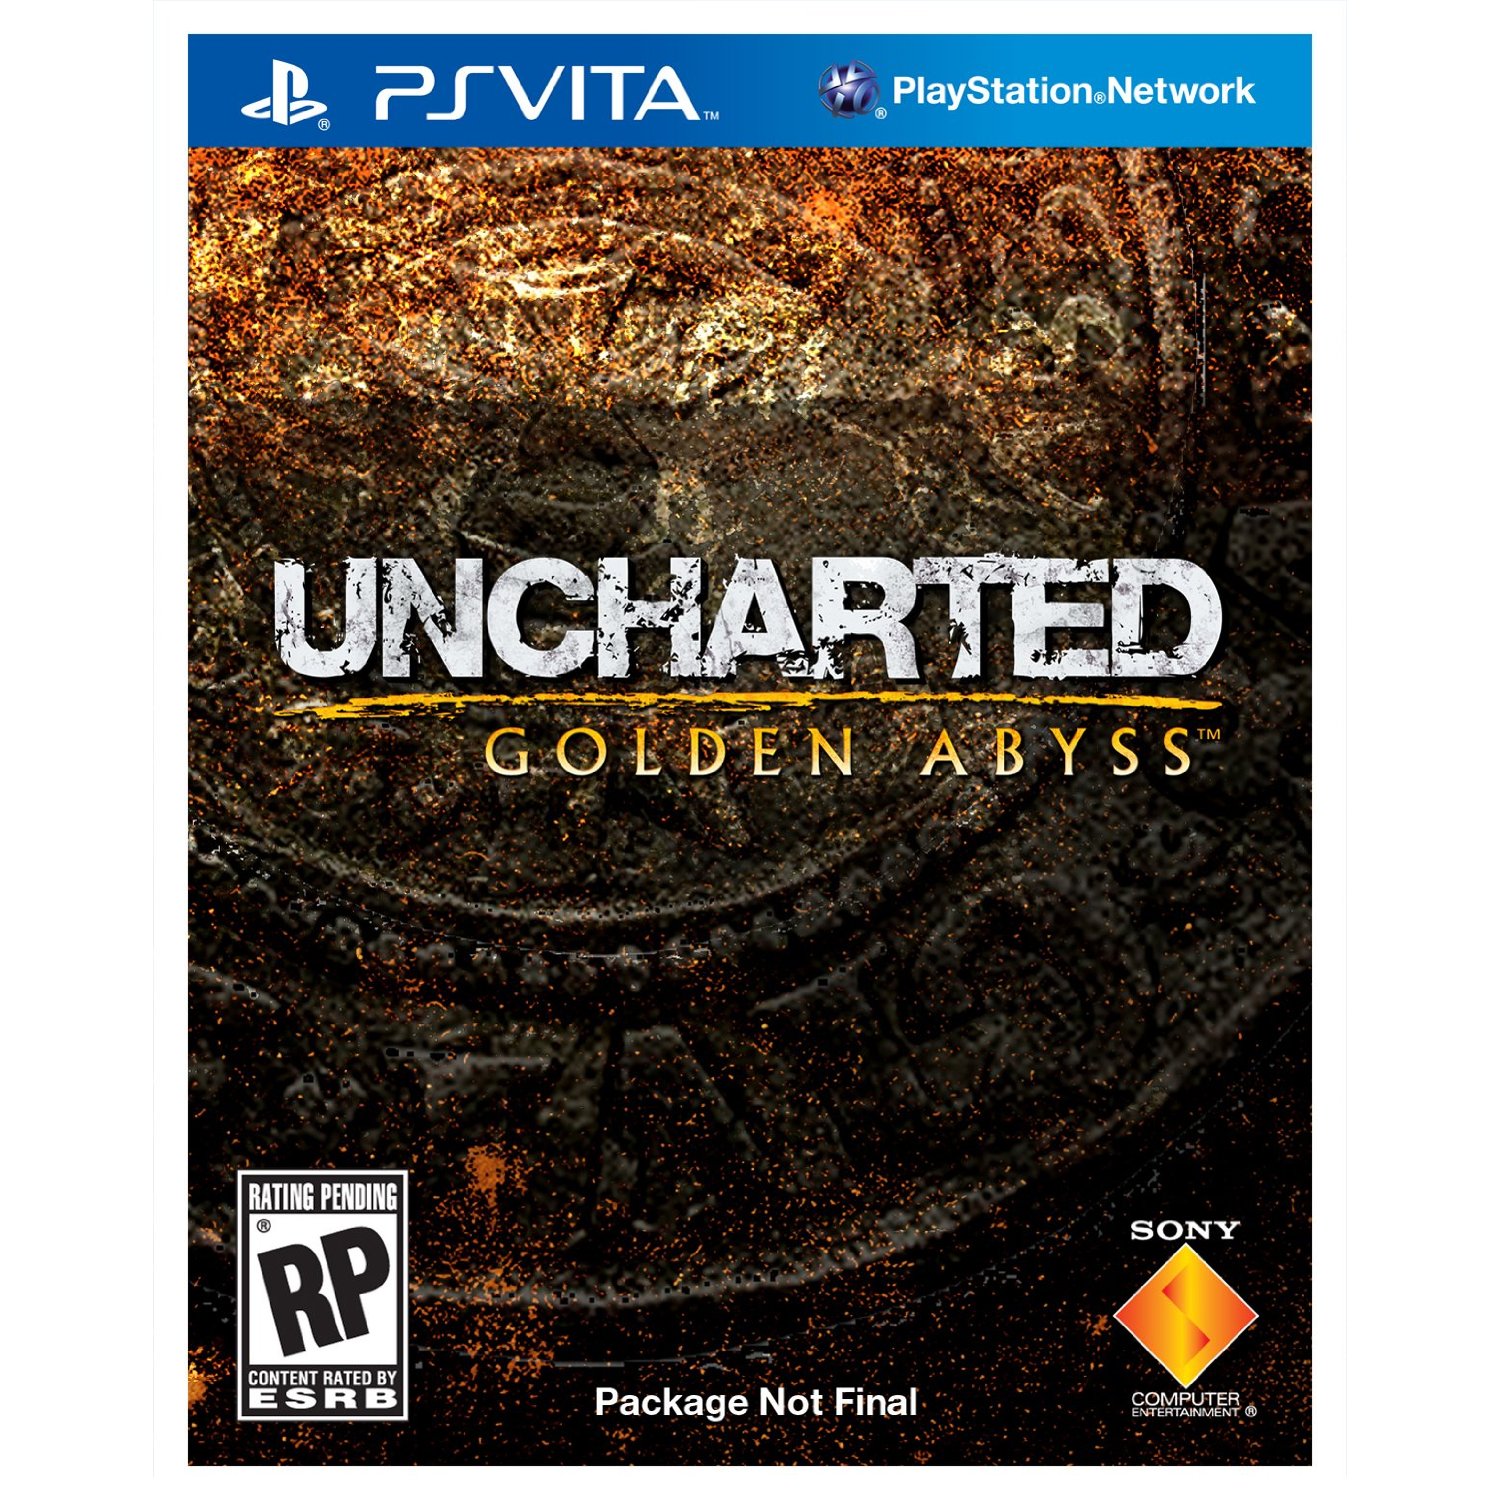 http://thetechjournal.com/wp-content/uploads/images/1112/1324125461-uncharted-golden-abyss-game-for-preorder-1.jpg